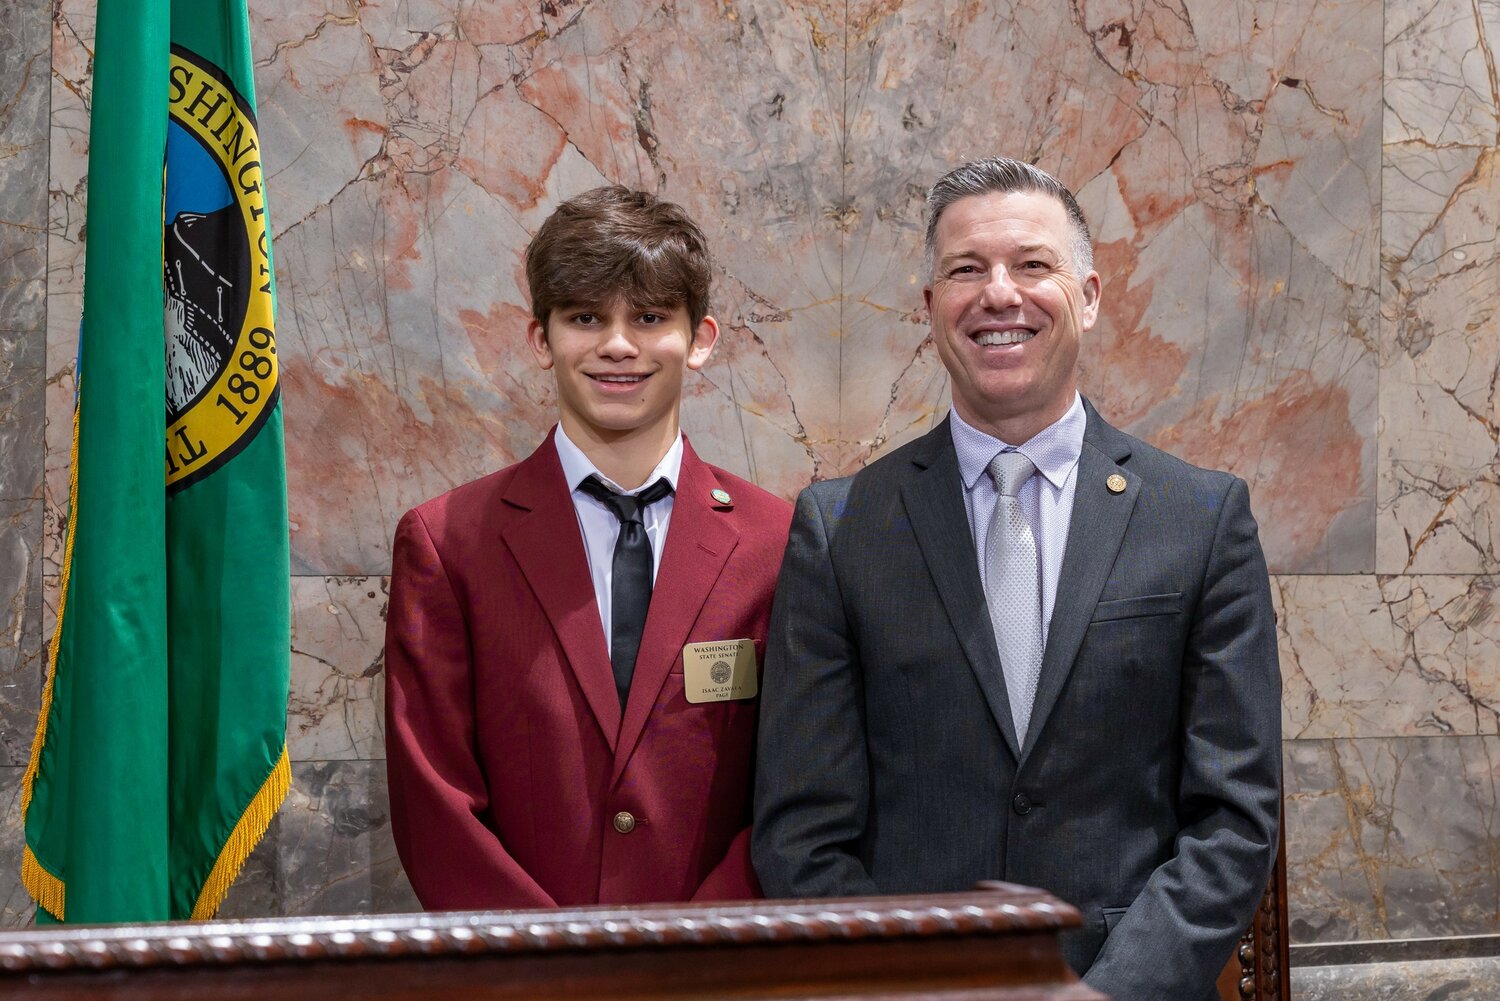 Cashmere High School sophomore Isaac Zavala (left) stands with 12th Legislative District Senator Brad Hawkins at the Capitol in Olympia, where Zavala served as a Senate page during the fourth week of the 2024 Legislative session. Isaac, who was sponsored by Senator Hawkins, gained firsthand experience in the legislative process, participating in floor voting and learning about parliamentary procedures.